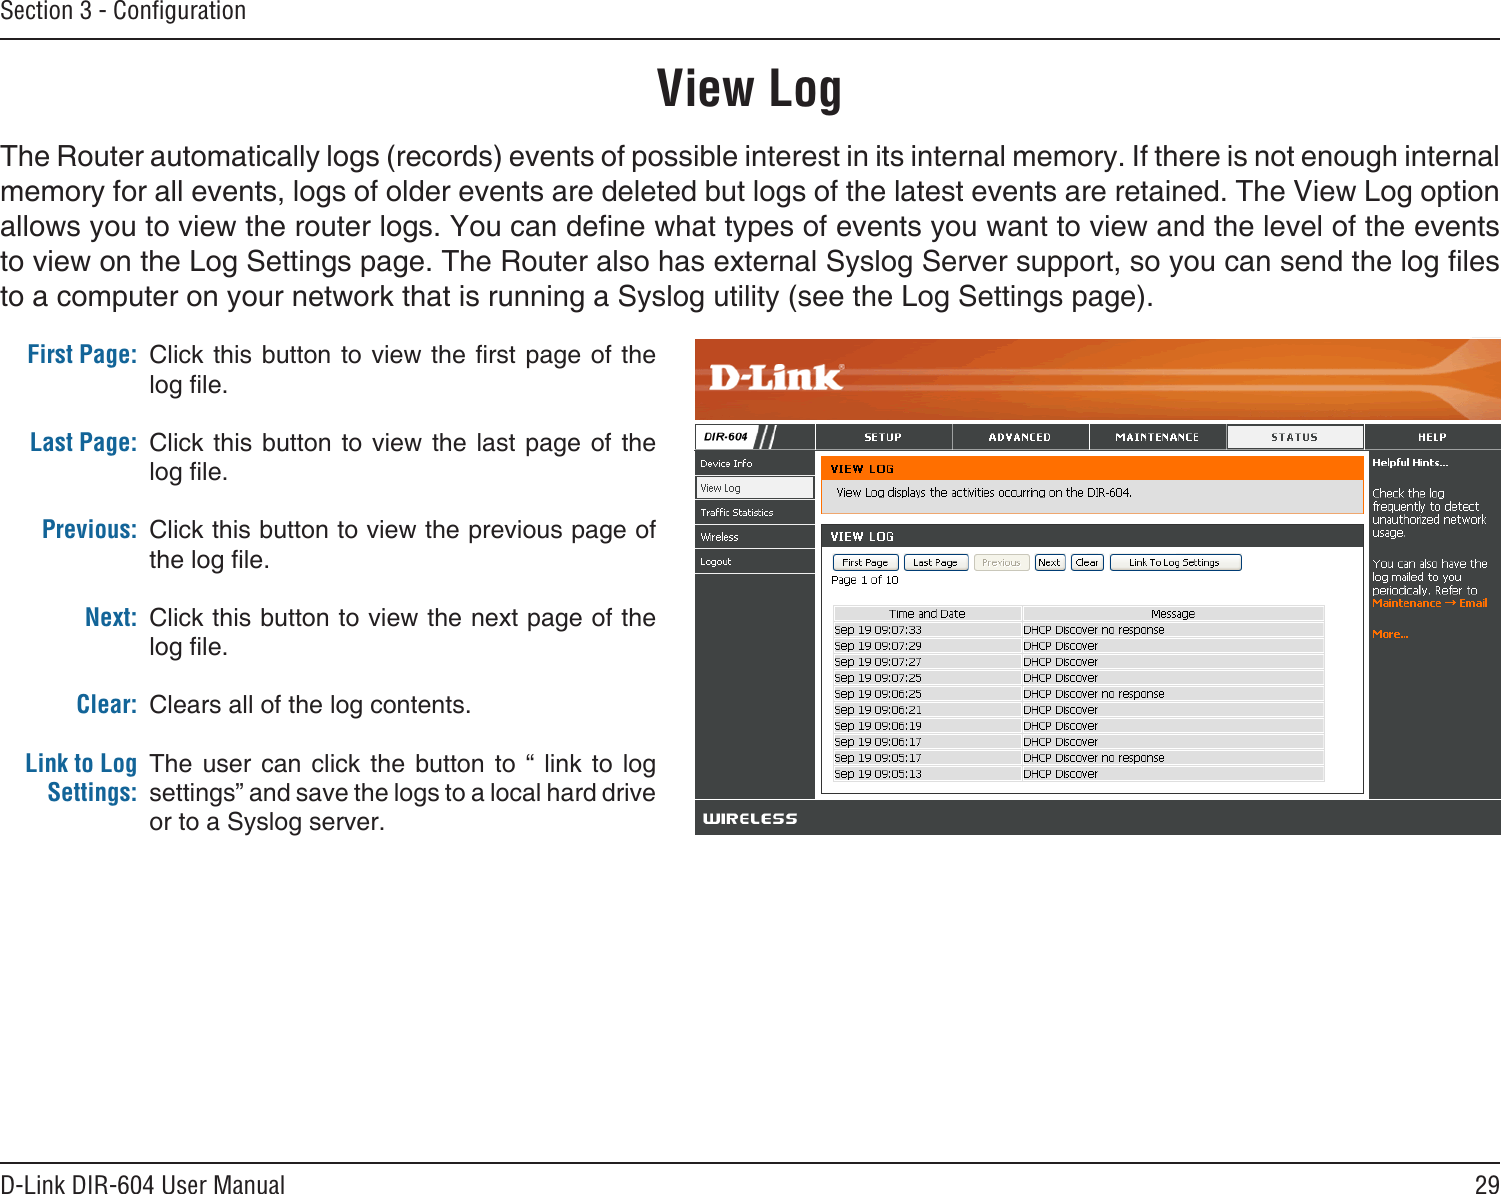 29D-Link DIR-604 User ManualSection 3 - ConﬁgurationView LogFirst Page:Last Page:Previous:Next:Clear:Link to Log Settings:Click this button to view the rst page of the log le.Click this  button  to  view the  last  page  of the log le.Click this button to view the previous page of the log le.Click this button to view the next page of the log le.Clears all of the log contents.The  user  can  click  the  button  to  “  link  to  log settings” and save the logs to a local hard drive or to a Syslog server.The Router automatically logs (records) events of possible interest in its internal memory. If there is not enough internal memory for all events, logs of older events are deleted but logs of the latest events are retained. The View Log option allows you to view the router logs. You can dene what types of events you want to view and the level of the events to view on the Log Settings page. The Router also has external Syslog Server support, so you can send the log les to a computer on your network that is running a Syslog utility (see the Log Settings page).